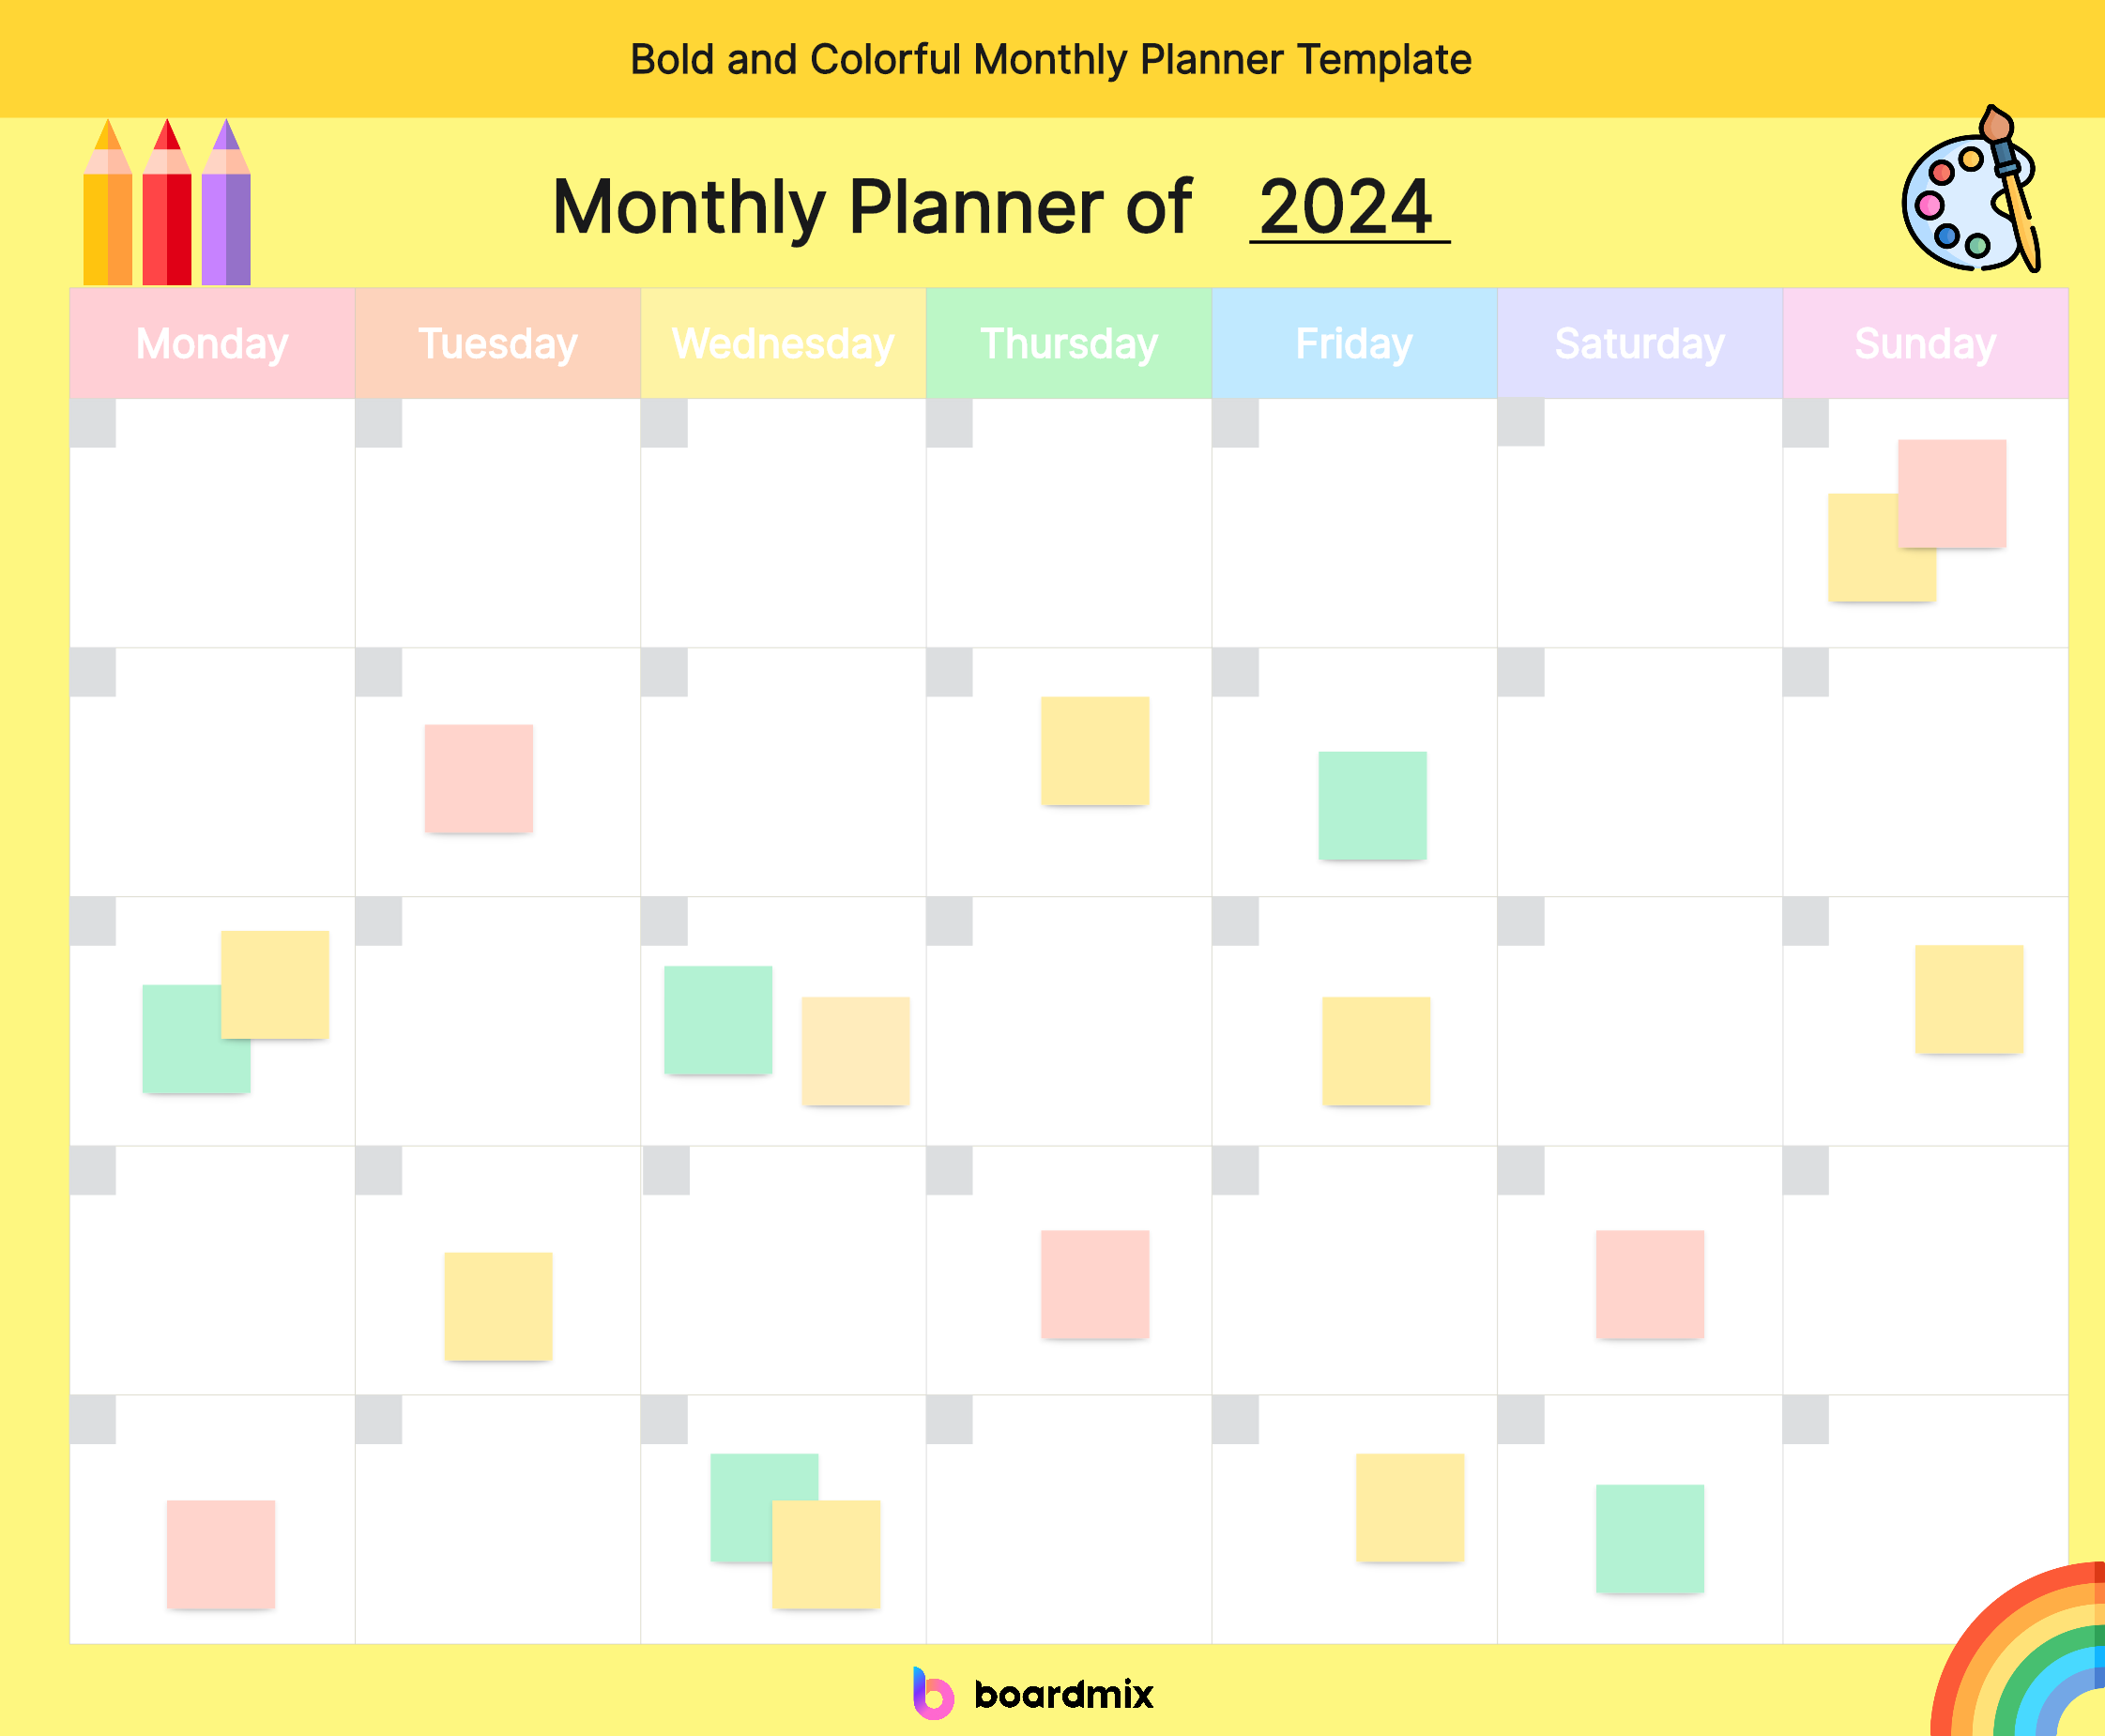 bold-and-colorful-monthly-planner-template.png